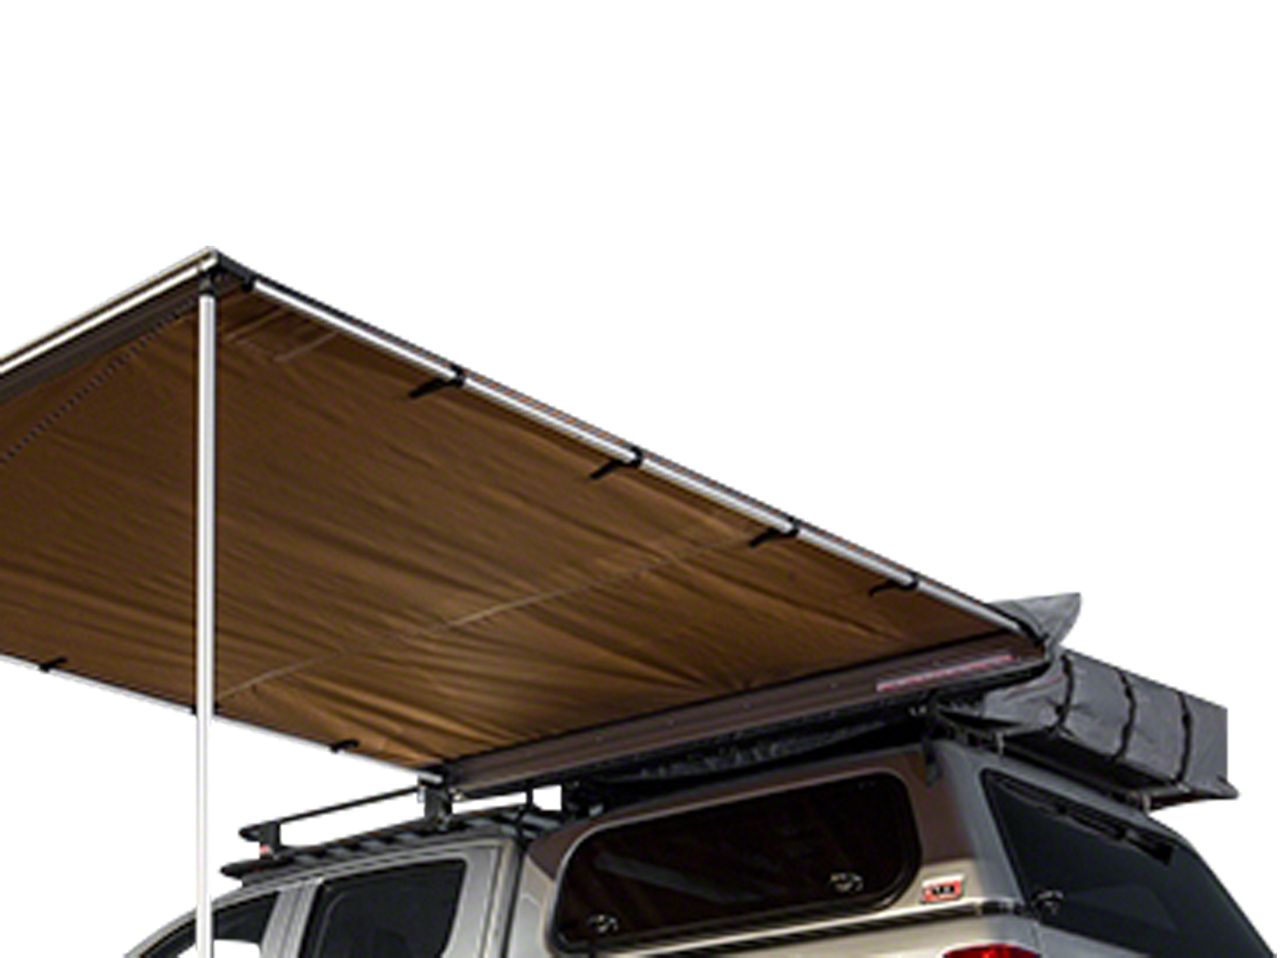 Tundra Roof Top Tents & Camping Gear